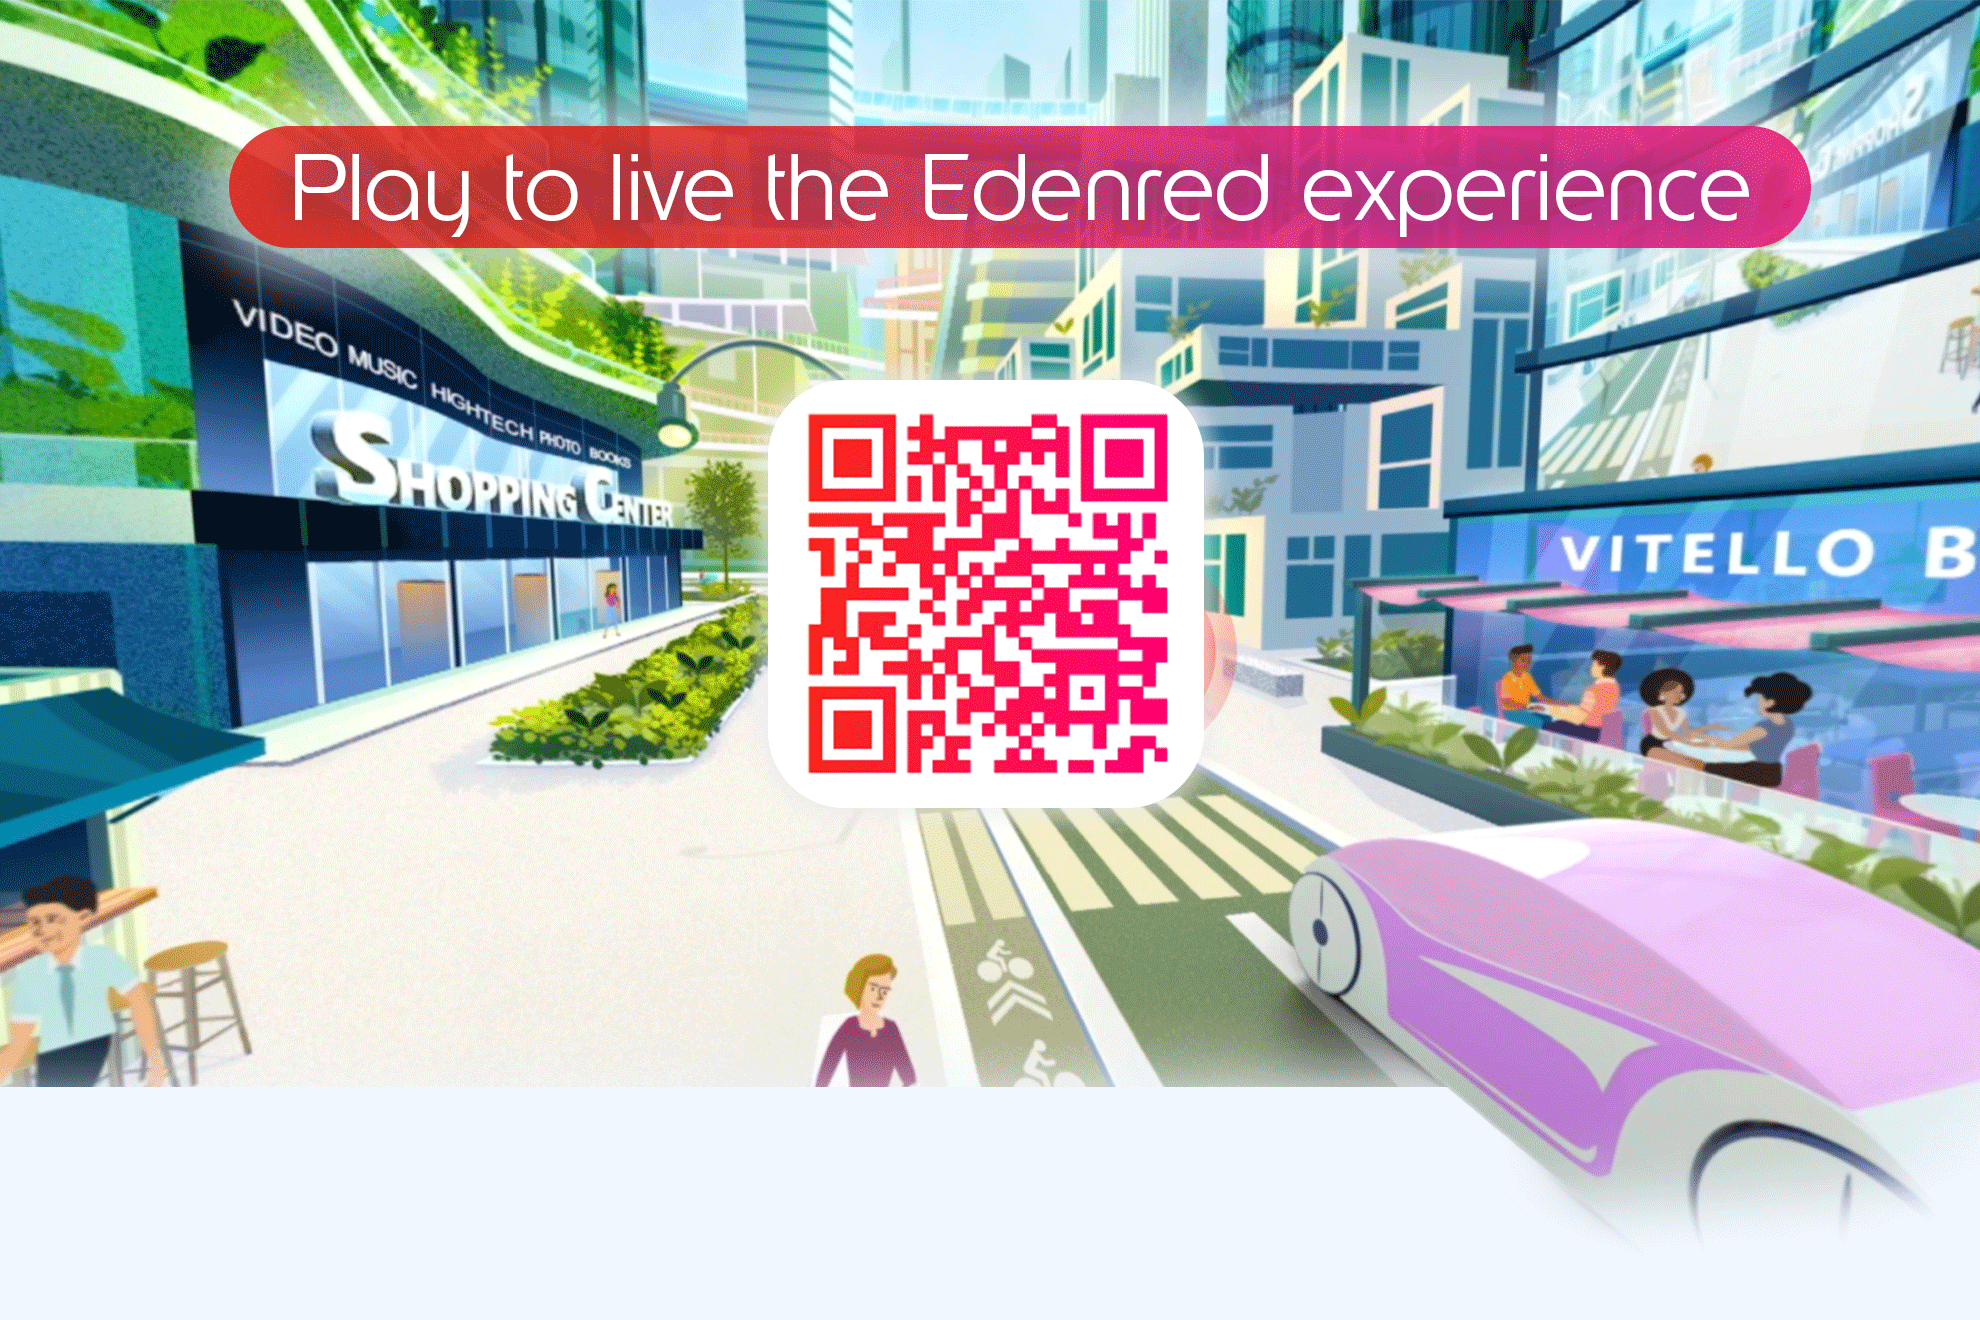 Play to live the Edenred experience